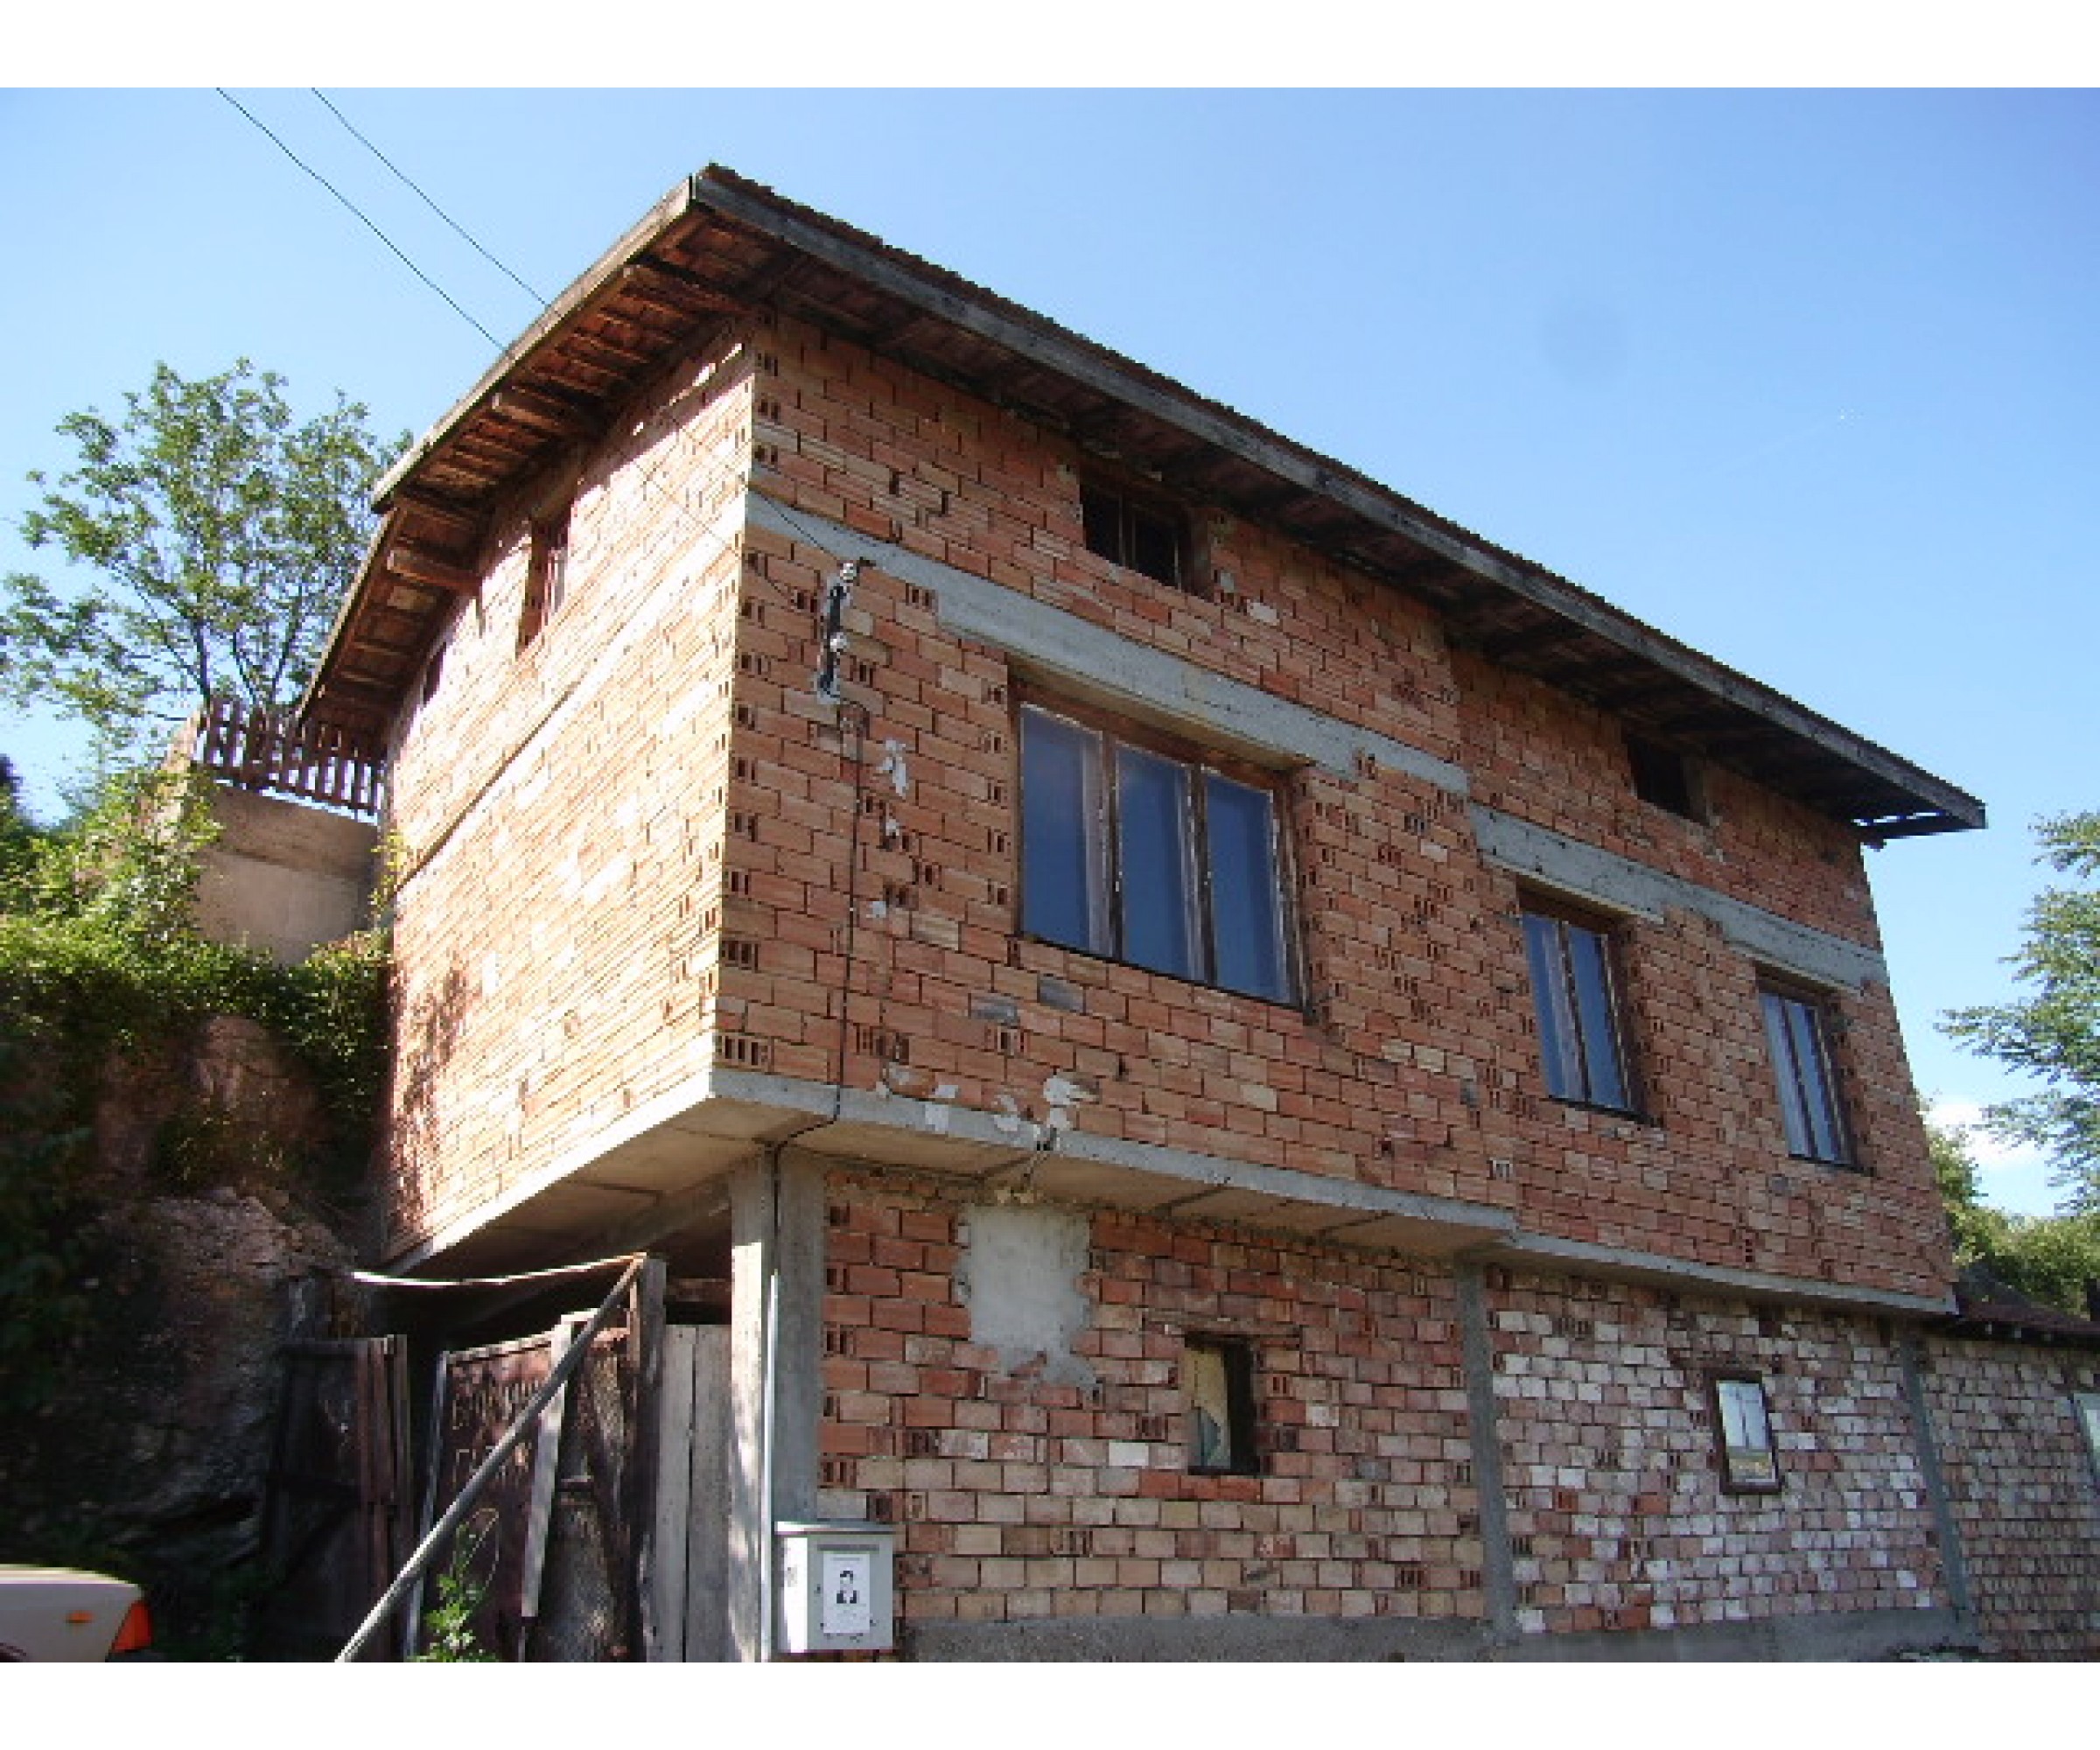 Two-storey house in the town of Lovech